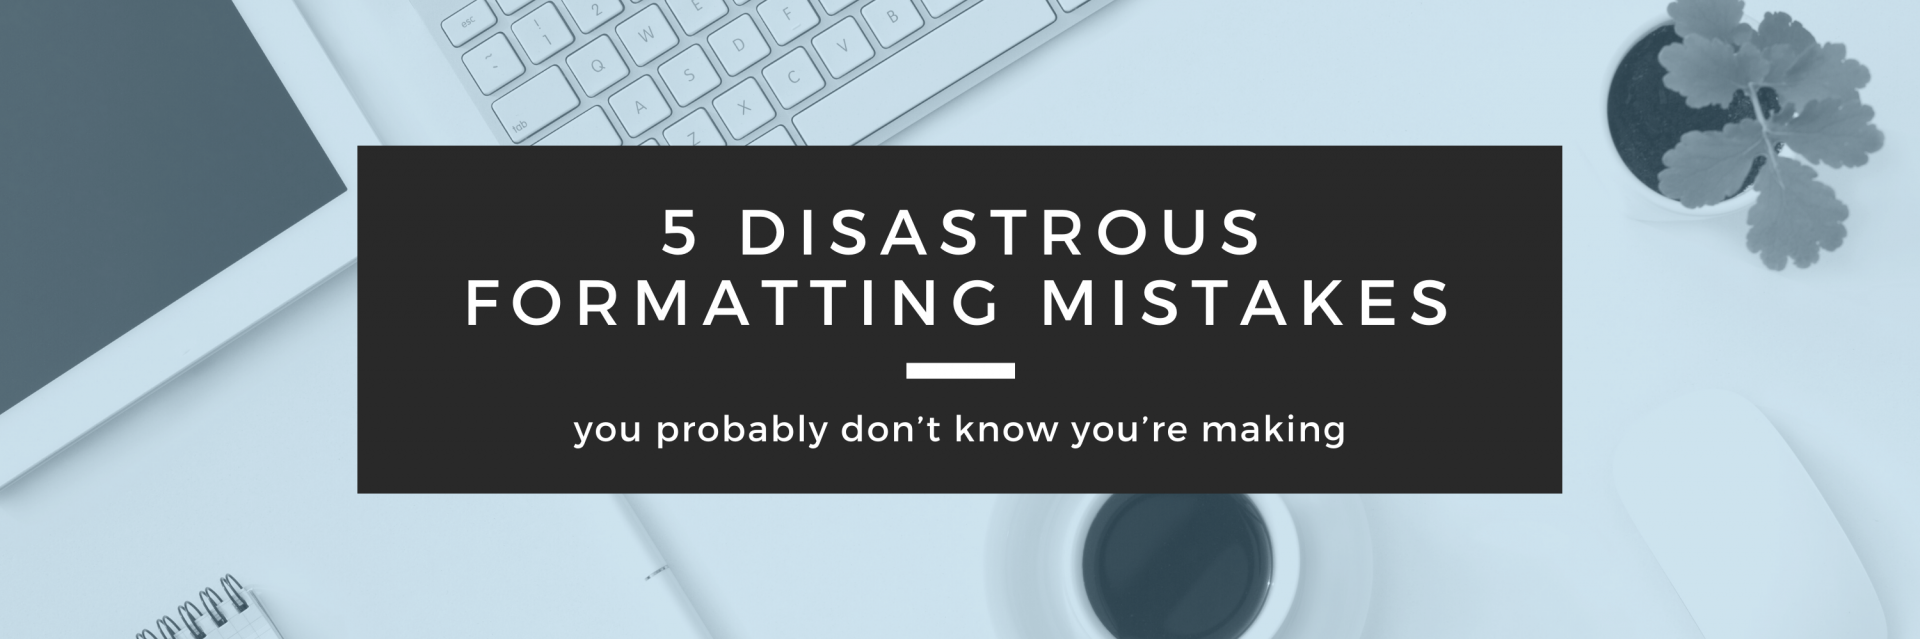 5 disastrous formatting mistakes you probably don’t know you’re making